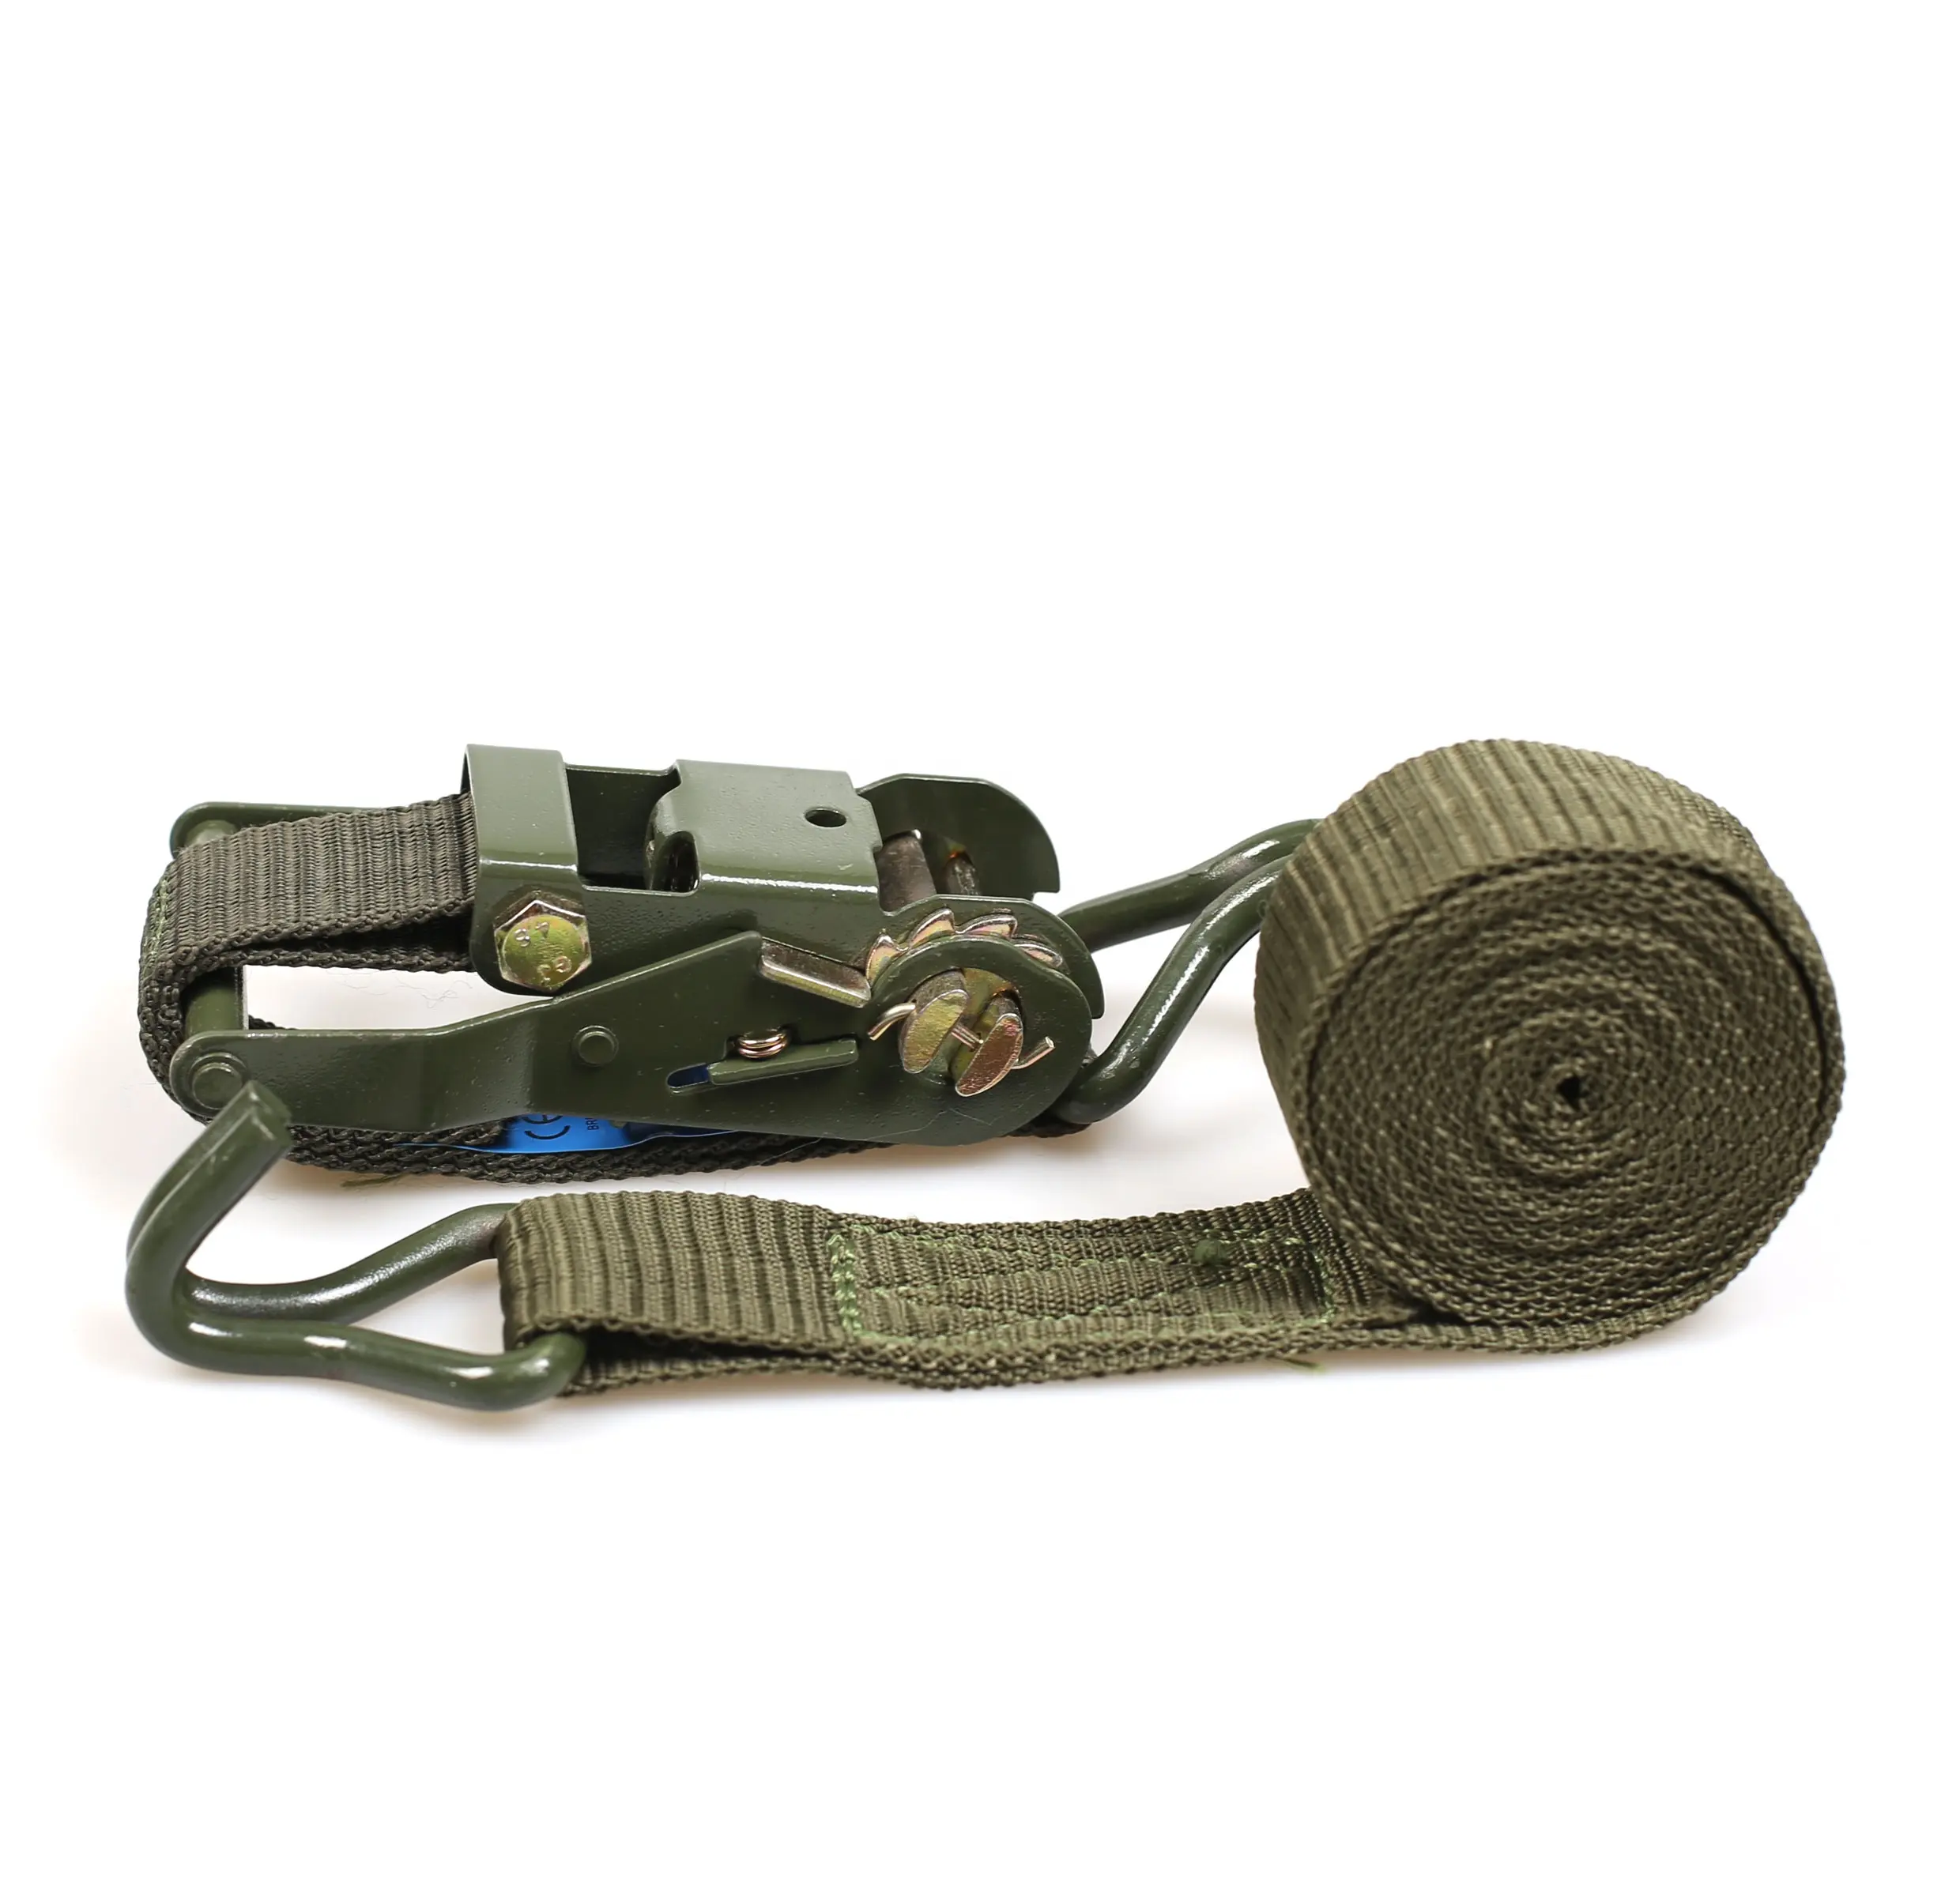 1.5inch 38mm 1000kg-1500kg Load Capacity Cargo Ratchet Tie Down Lashing Belt Strap With Double J Hook